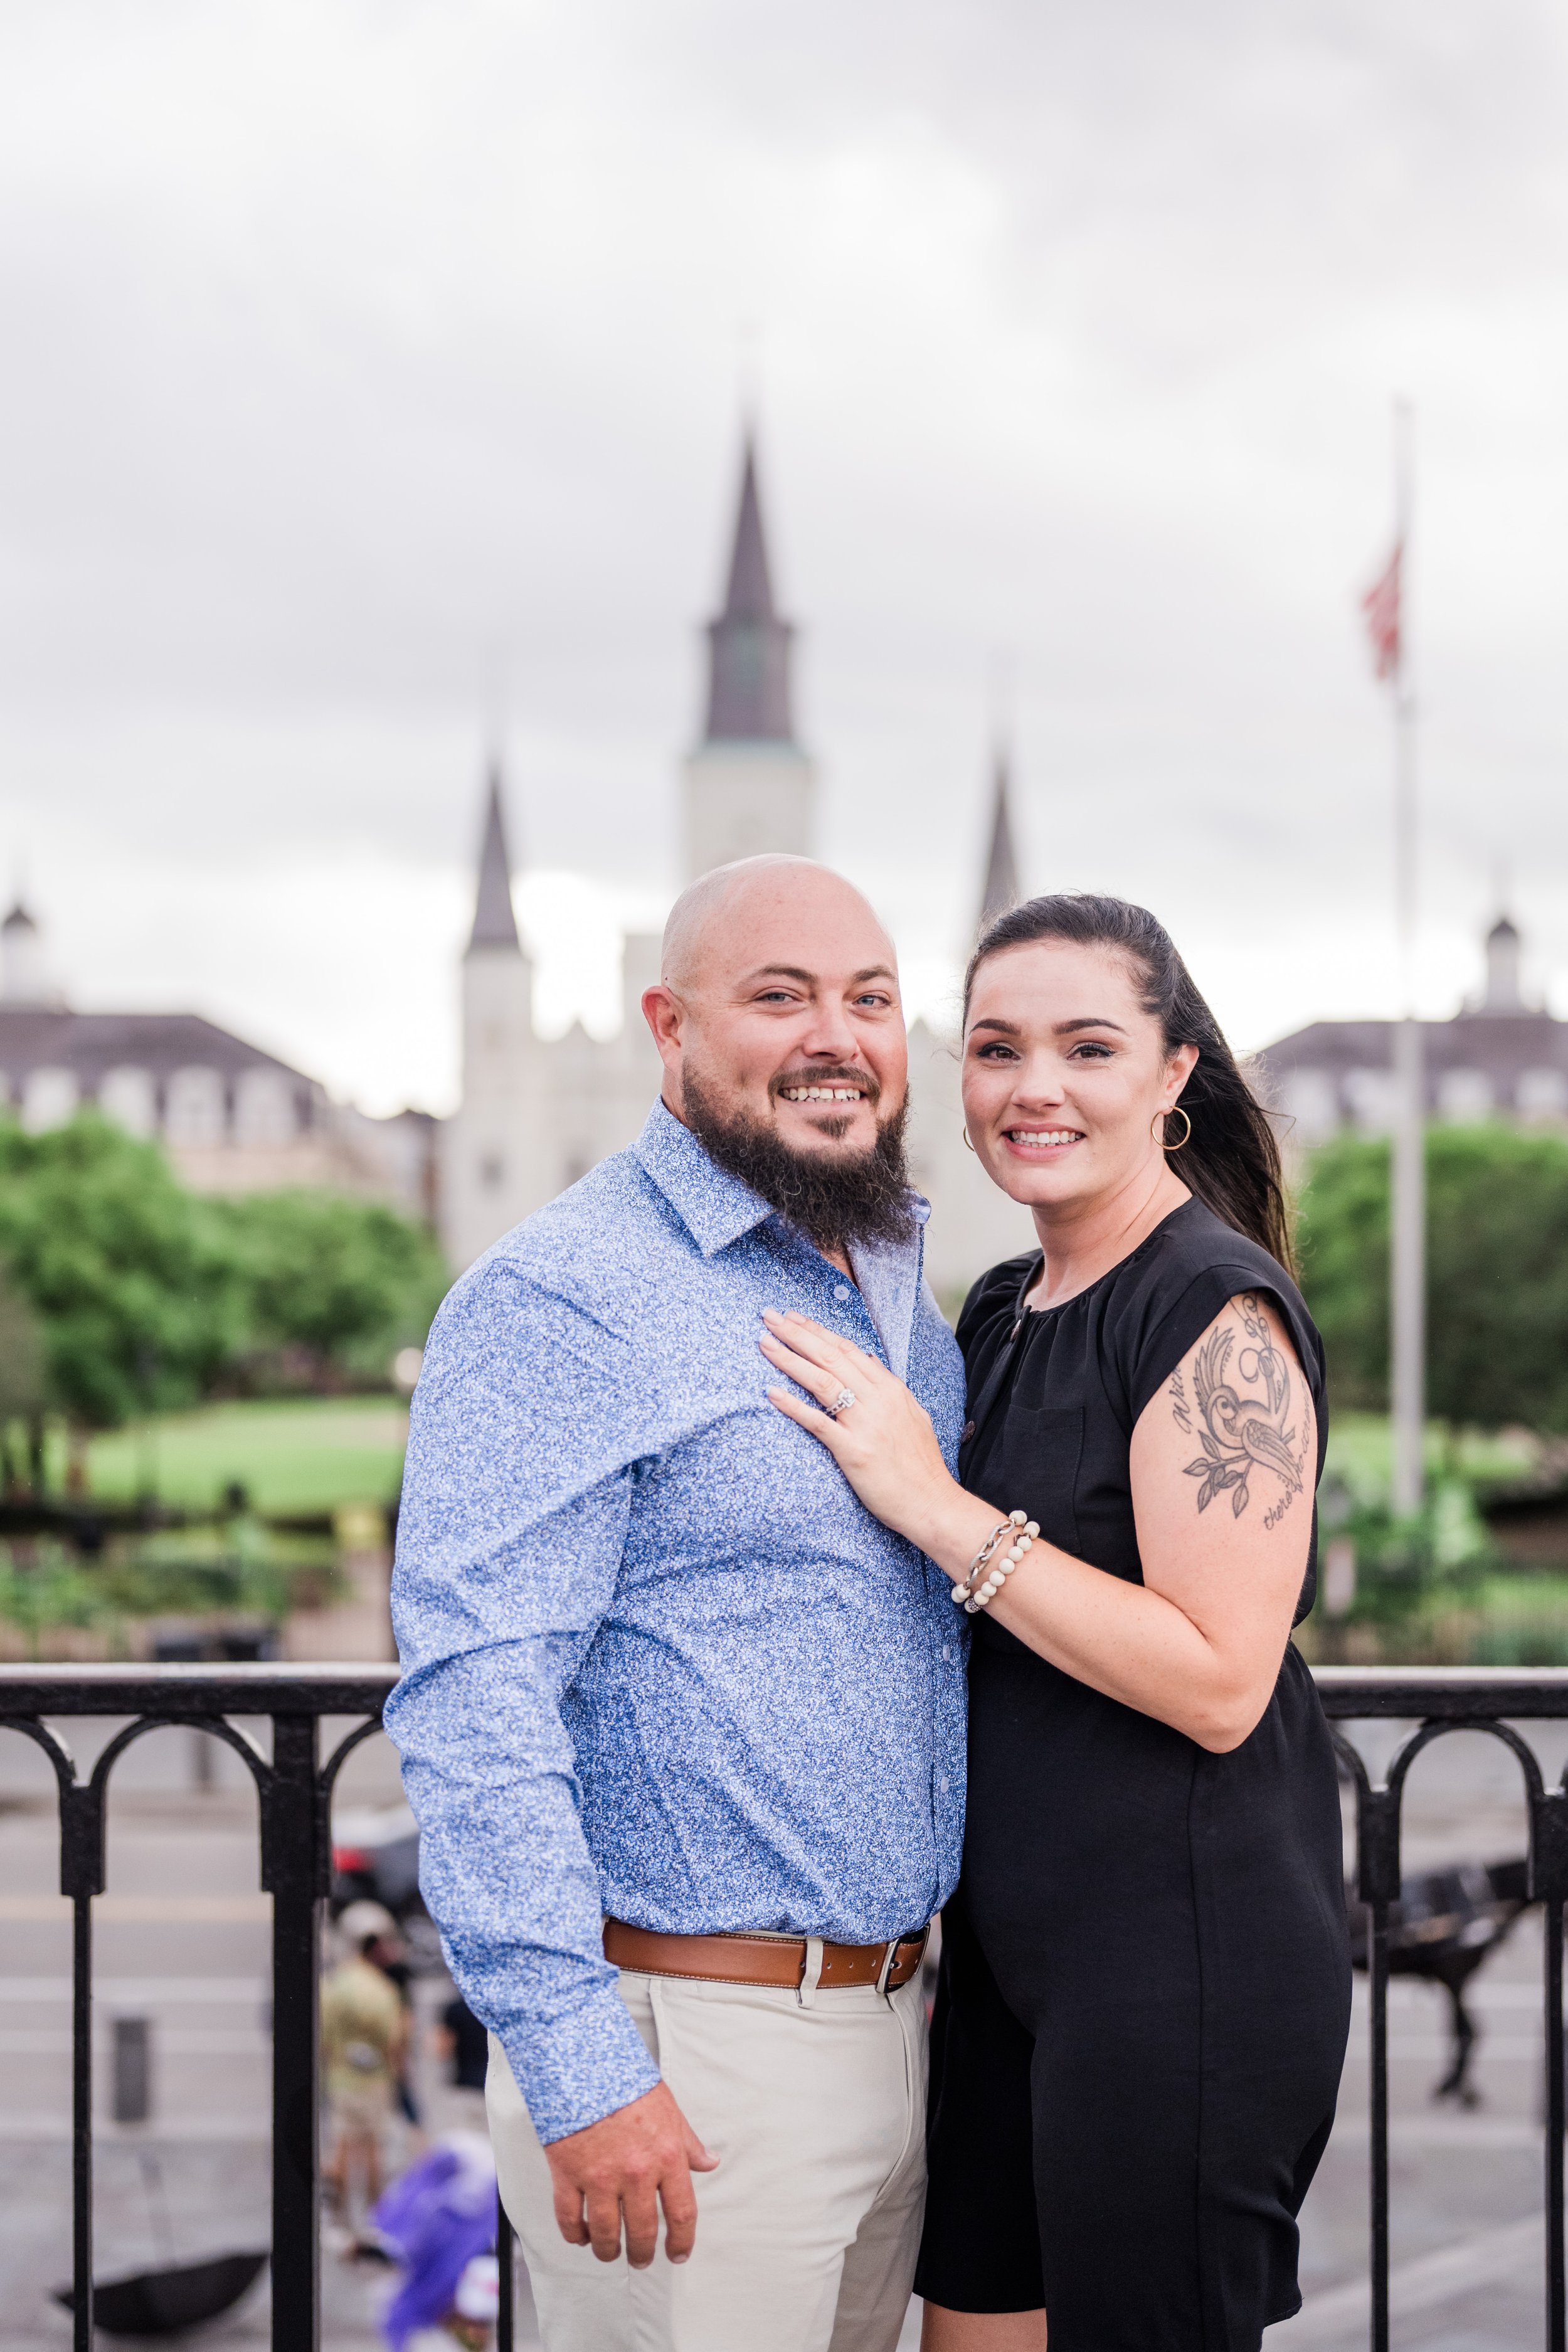  Jim proposes to his long time girlfriend, Amanda, overlooking Jackson Square 